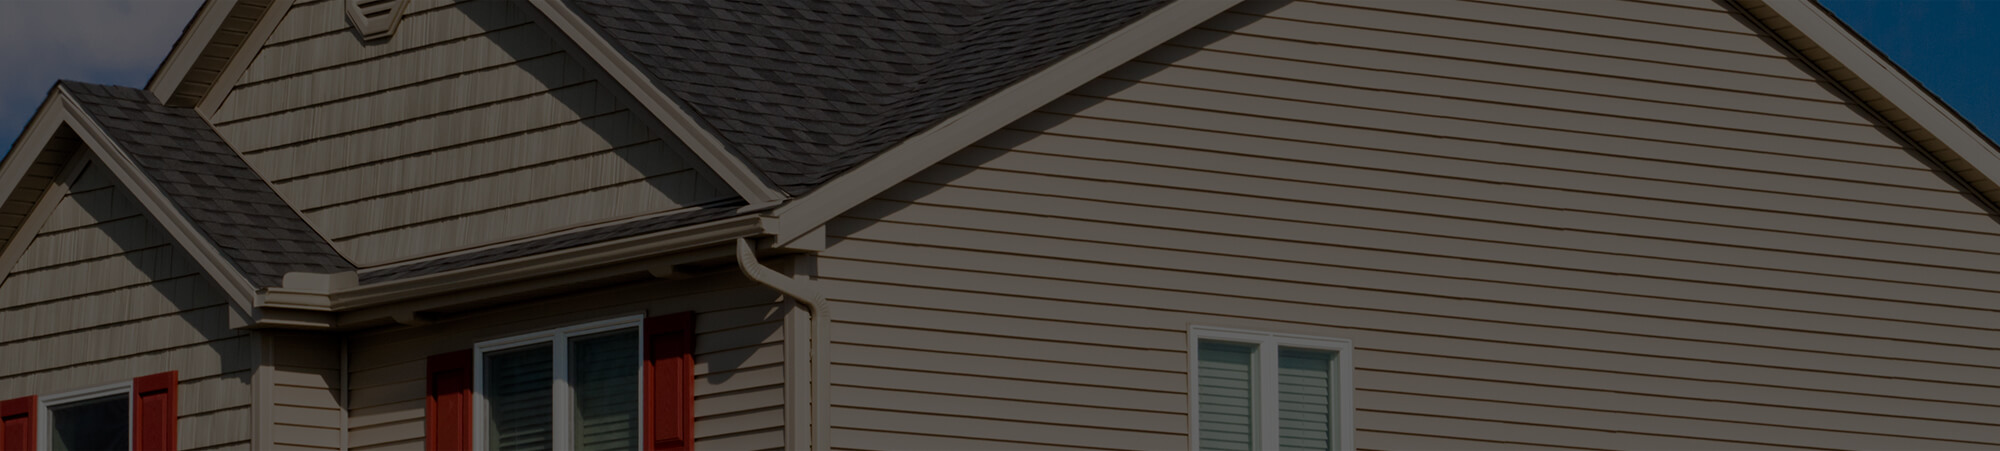 siding installation and replacement in ashwaubenon wi